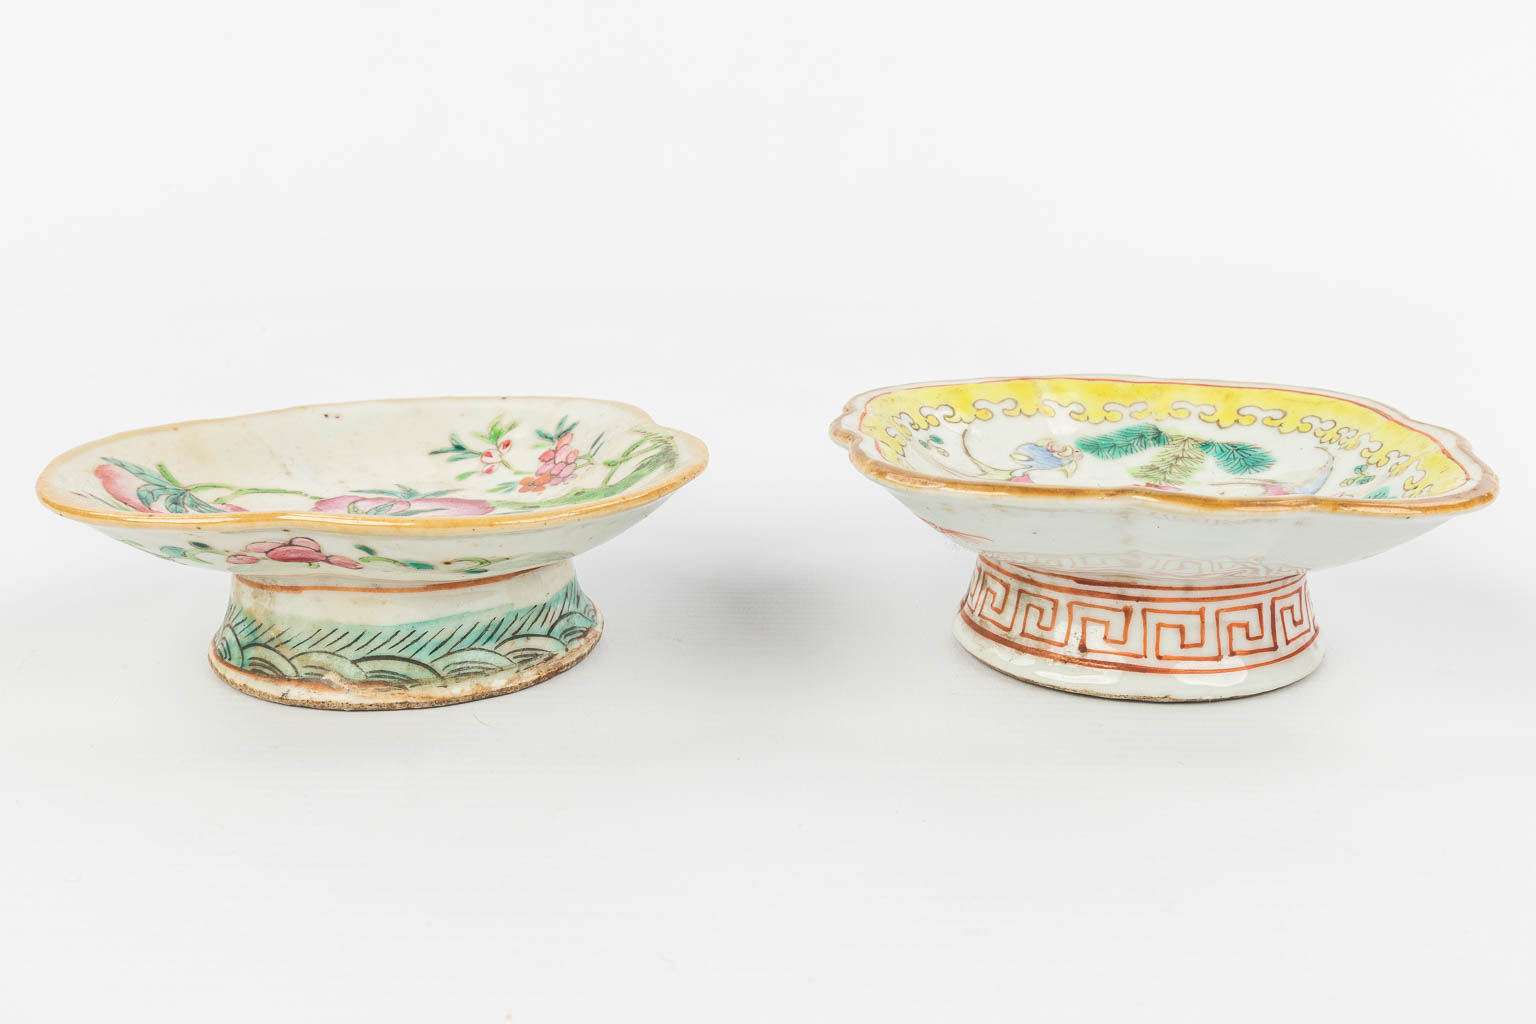 A collection of 2 Oriental bowls with images of peaches and fish. 19th century. (H:3,5cm)